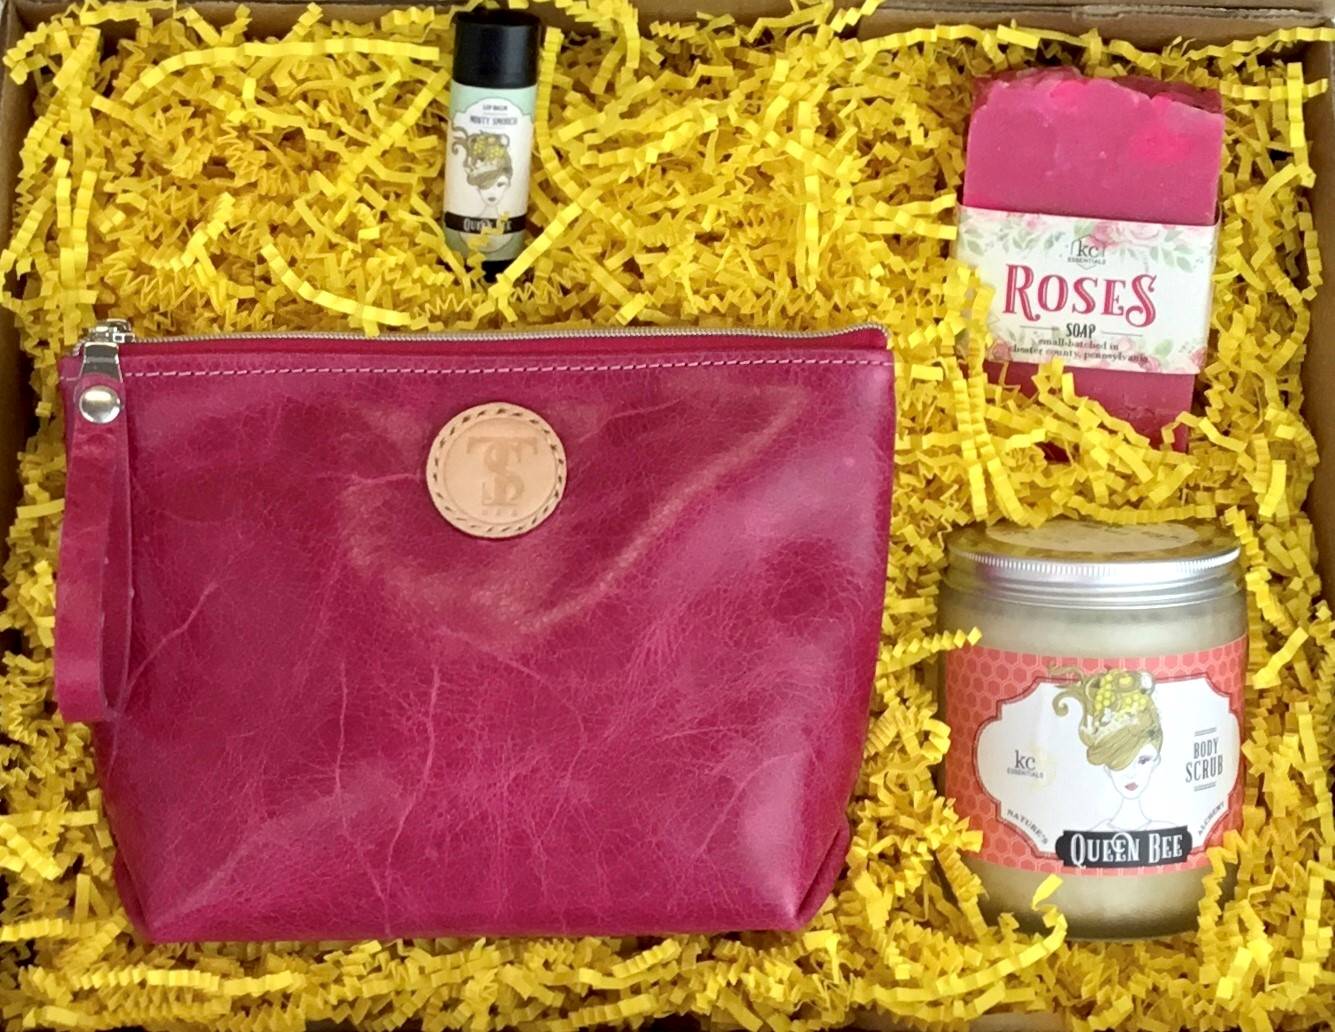 Town &amp; Shore Handcrafted Serenity Gift set featuring T5 Leather bath kit and brush bag shown in hot pink calfskin leather. KC Essentials artisan made vegan bar soap, essential oils body scrub and soothing lip balm. Arranged in gift box with sustainable eco-friendly yellow crinkle paper.